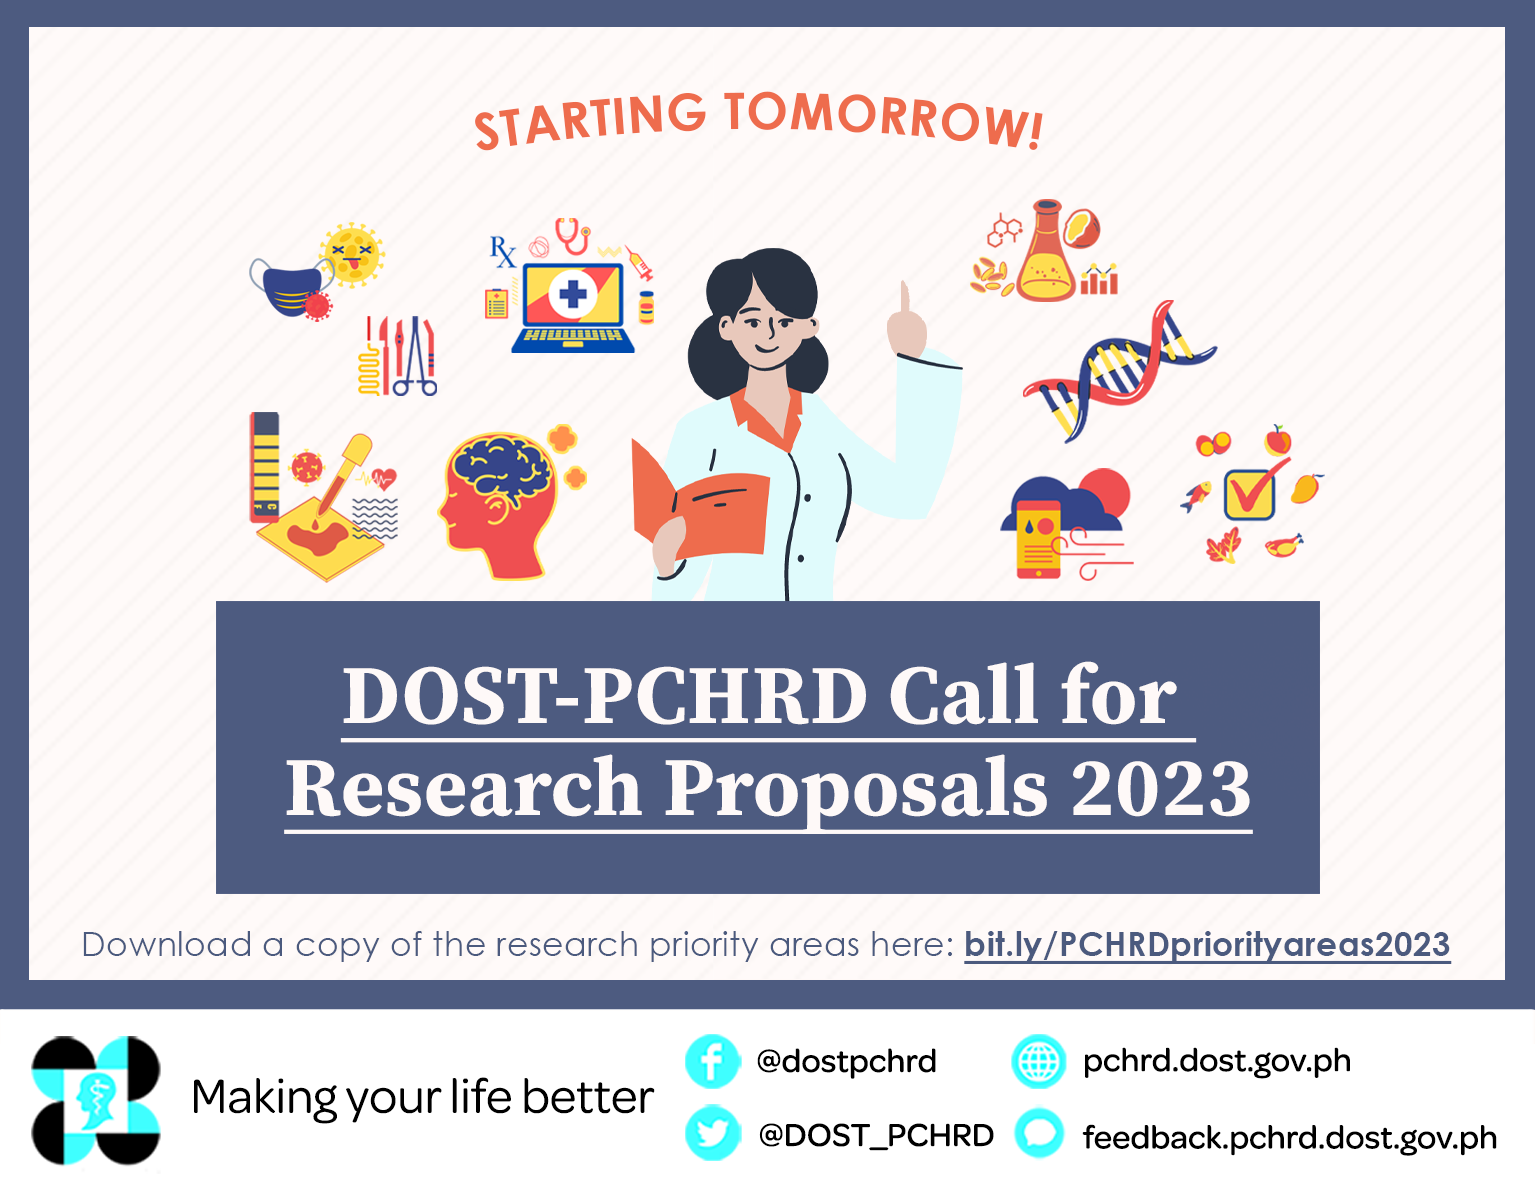 dost pchrd call for research proposals 2023